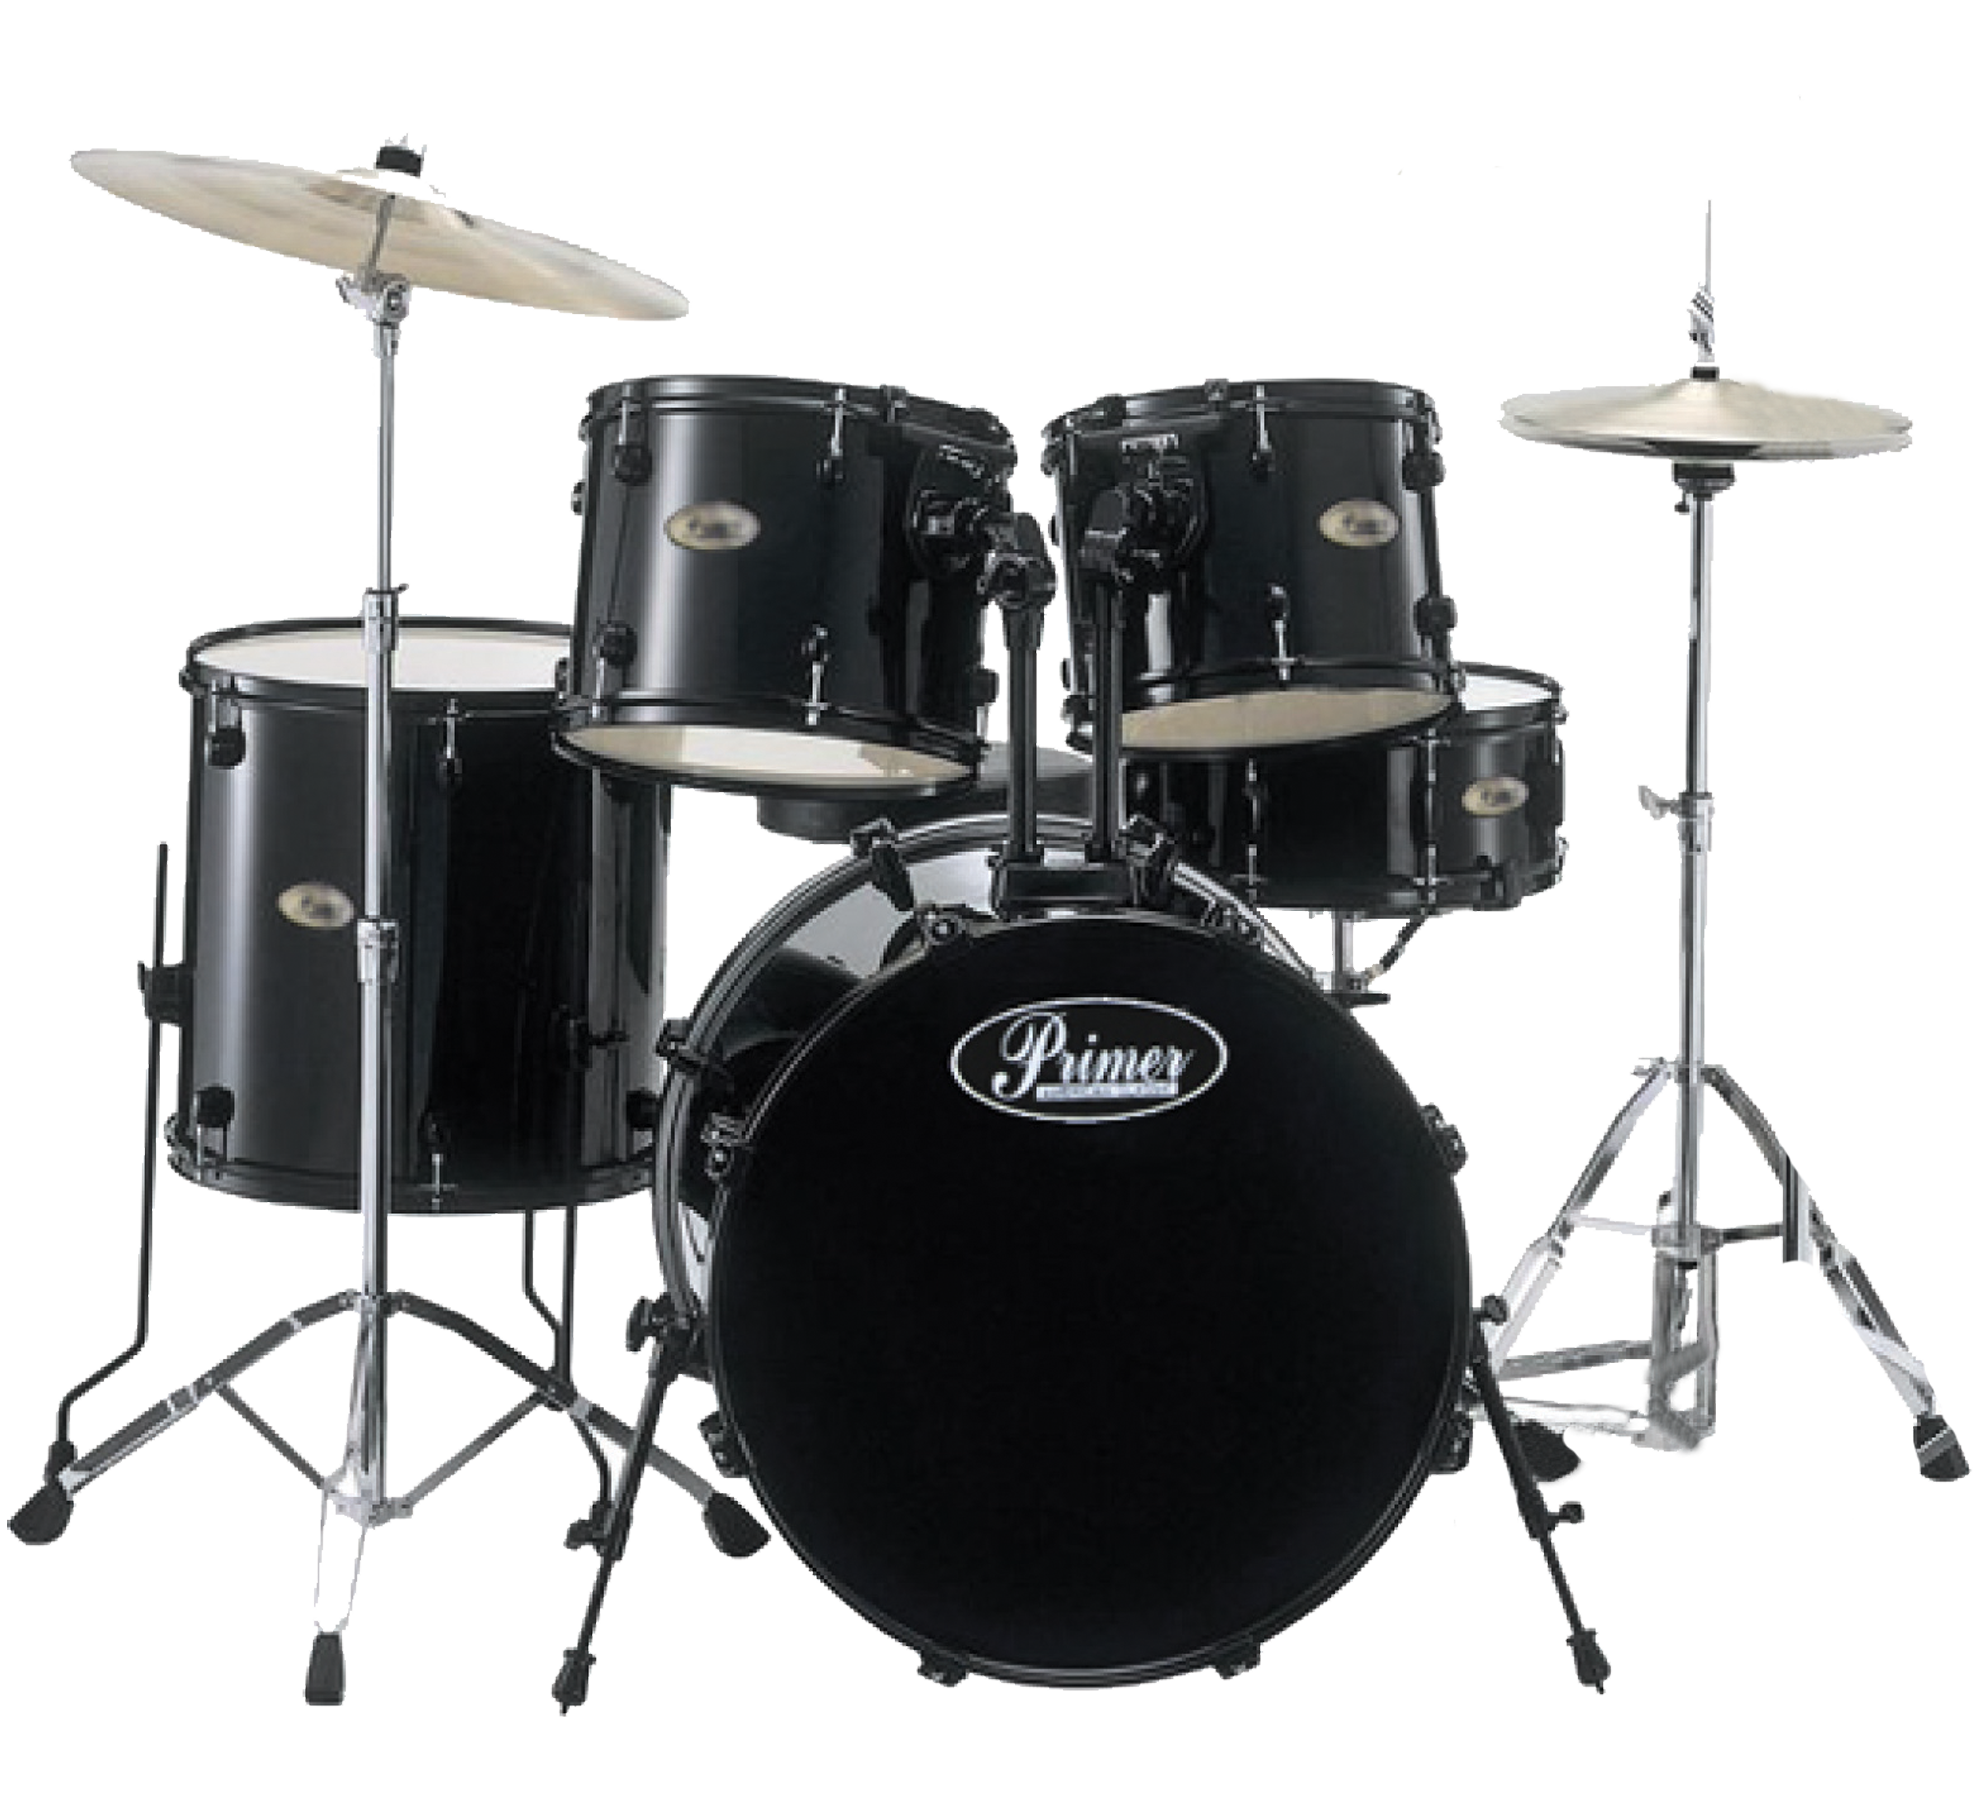 Drums Format: PNG Resolution: